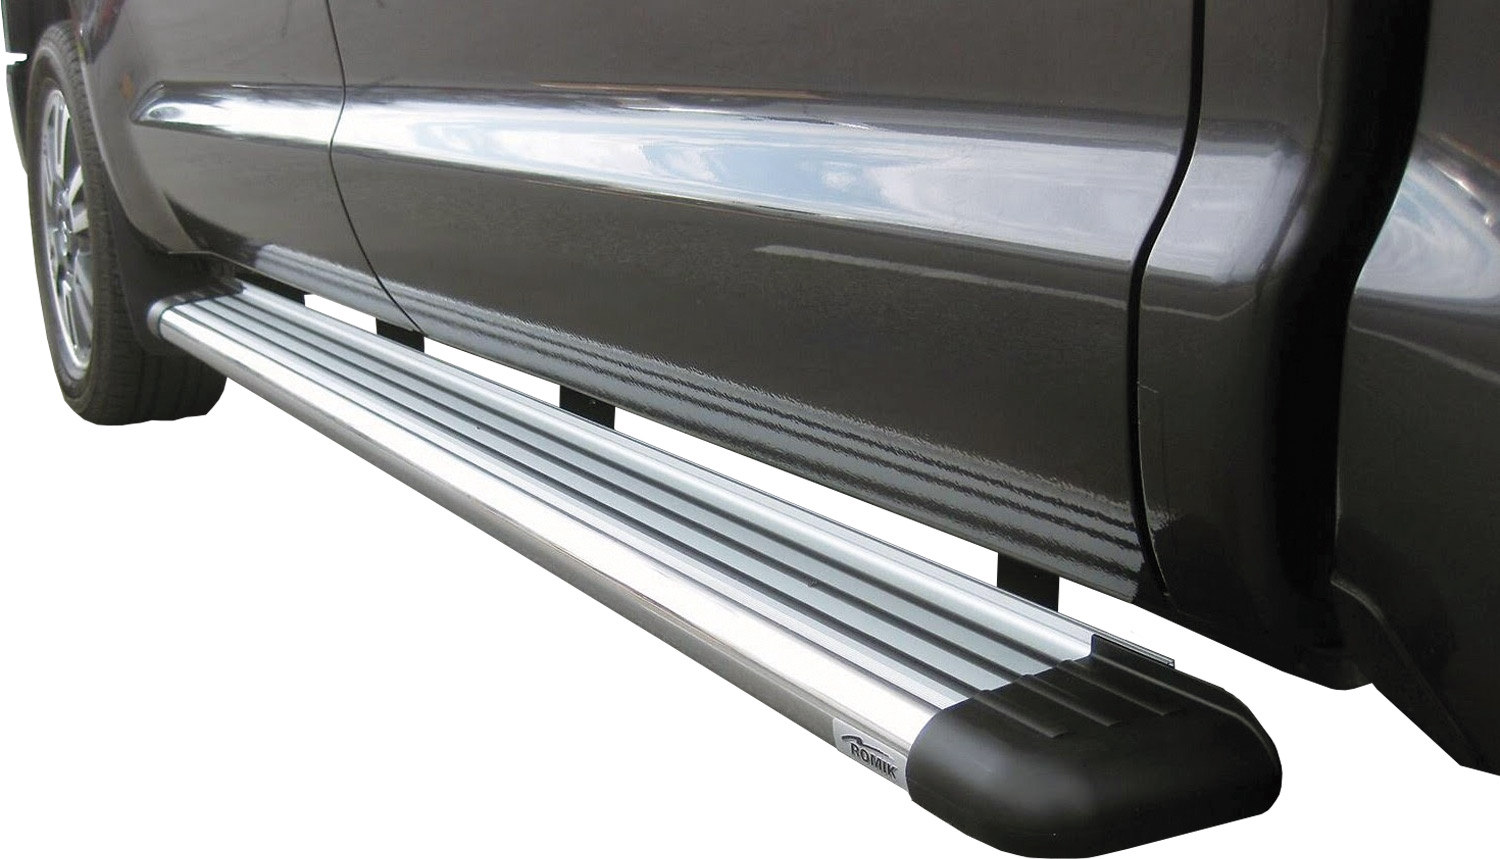 a Romik running board installed on a vehicle